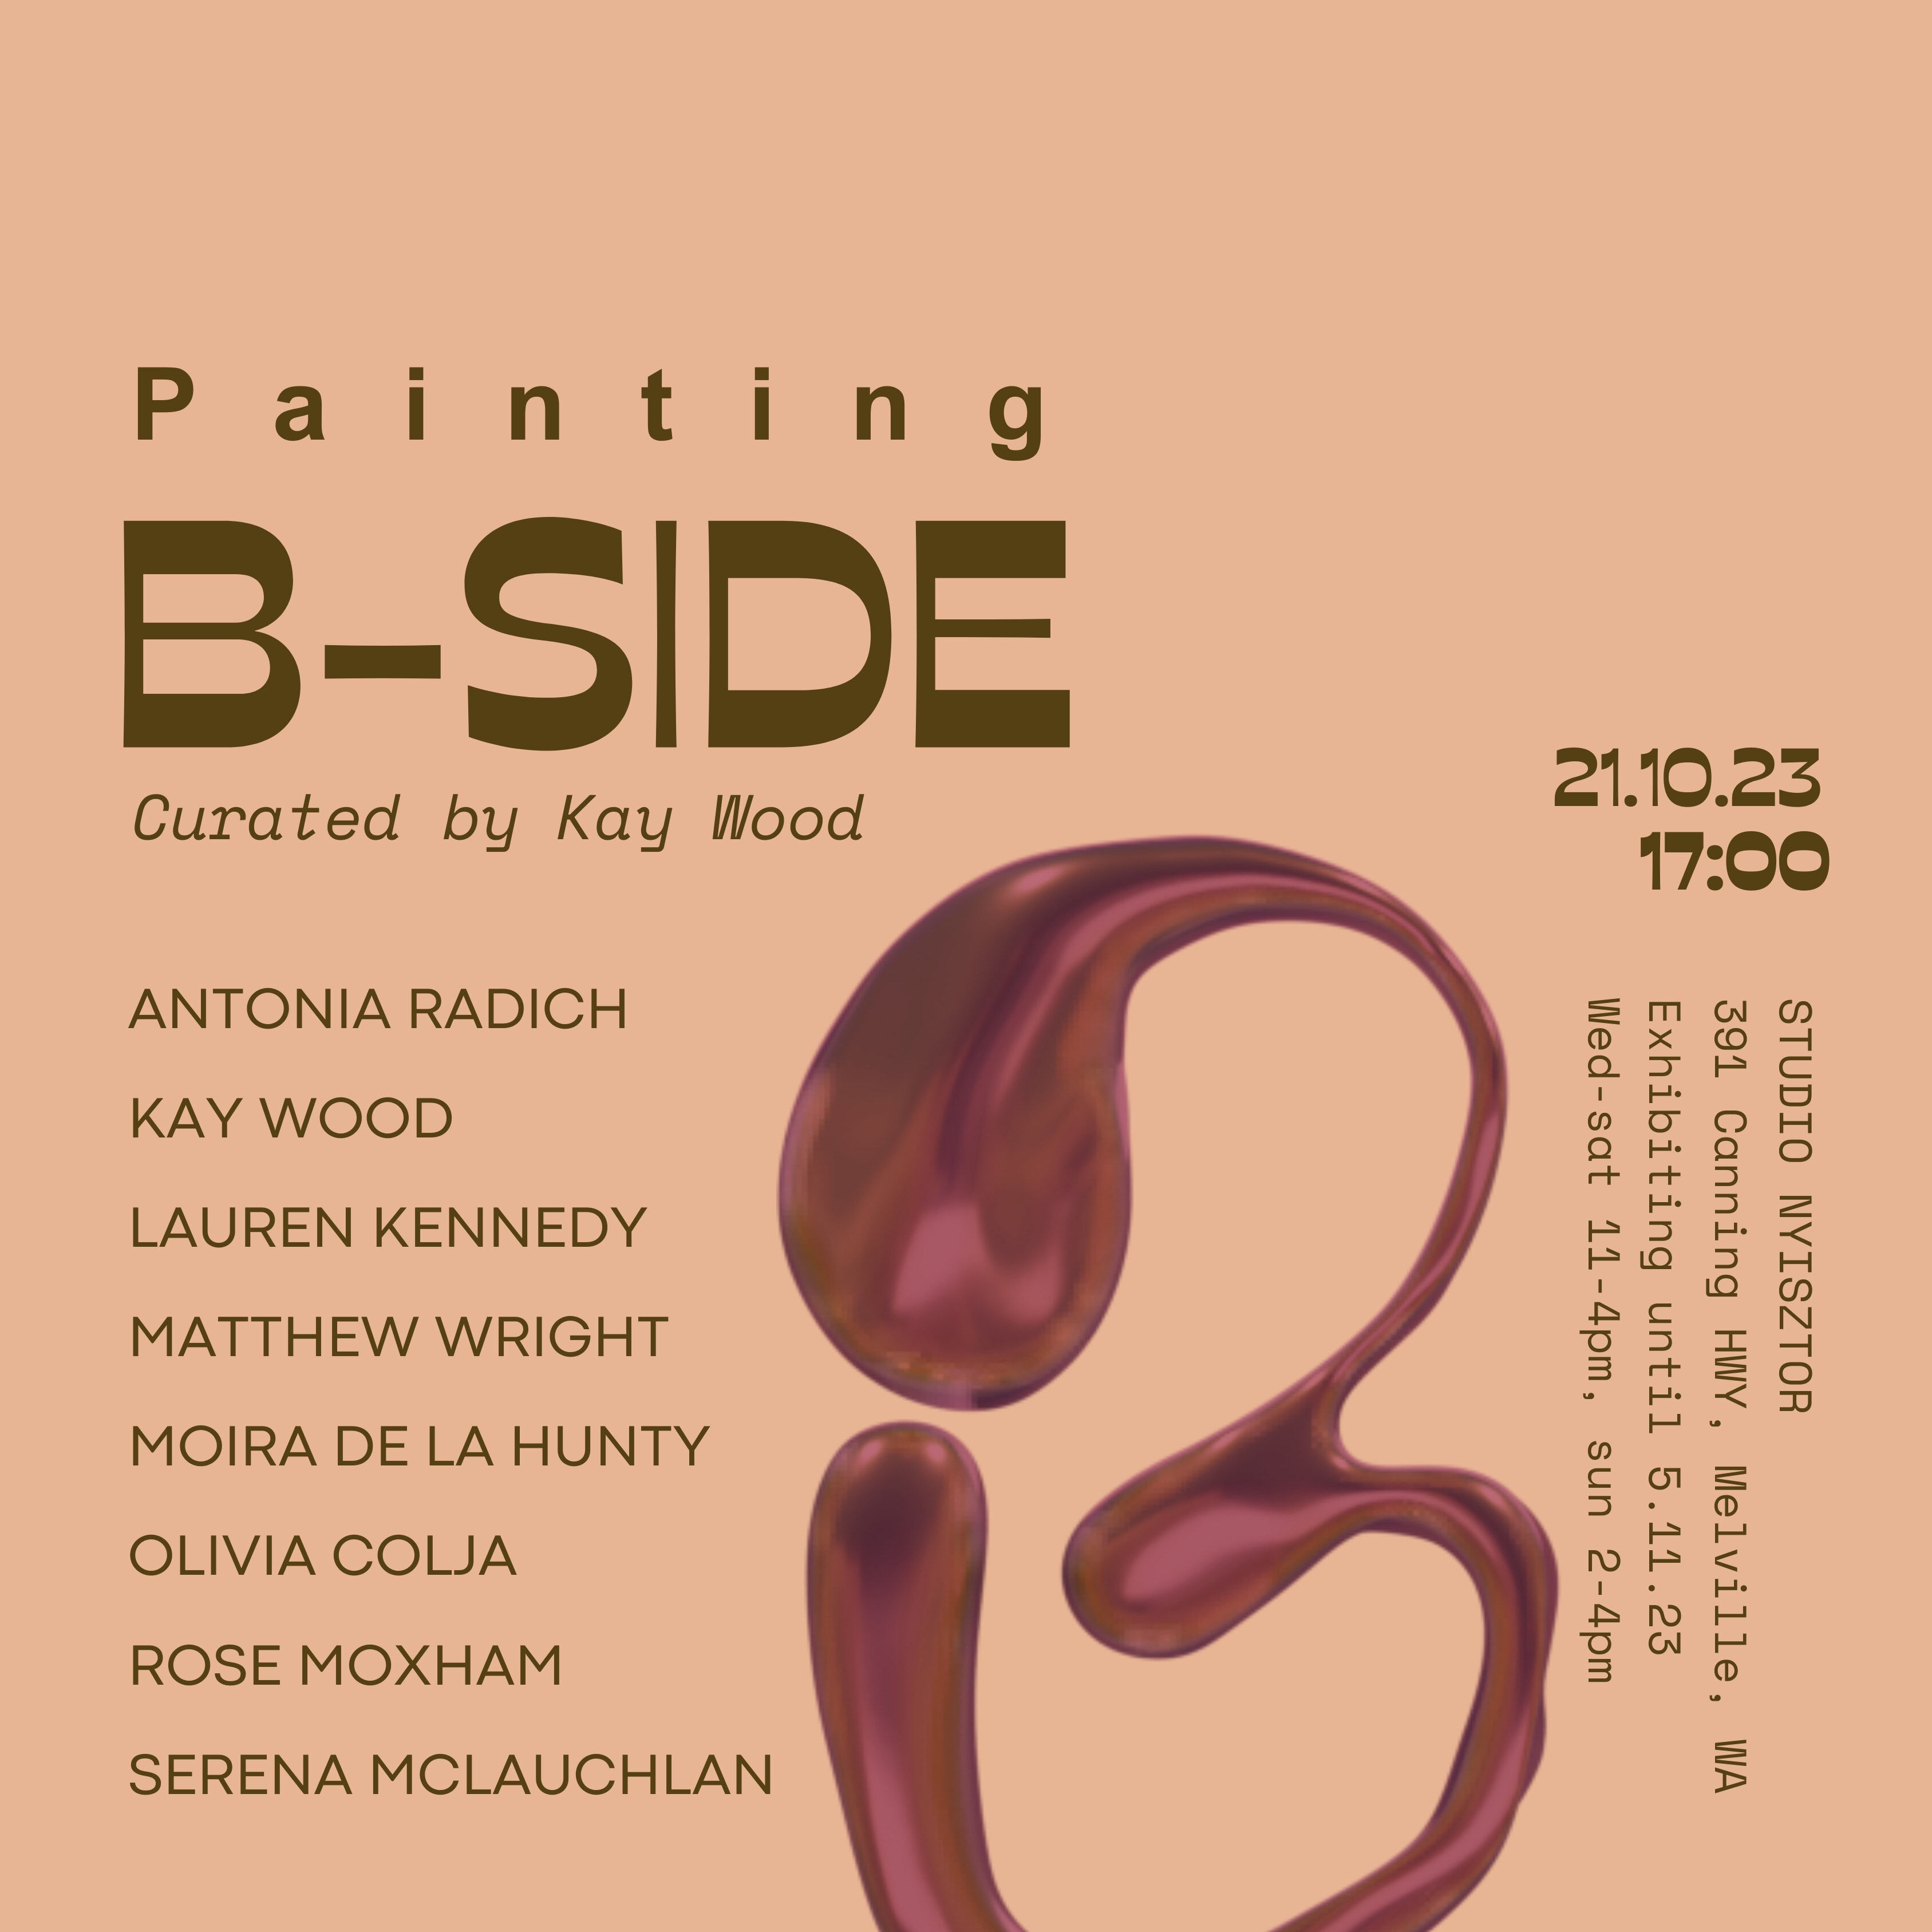 Painting B-side